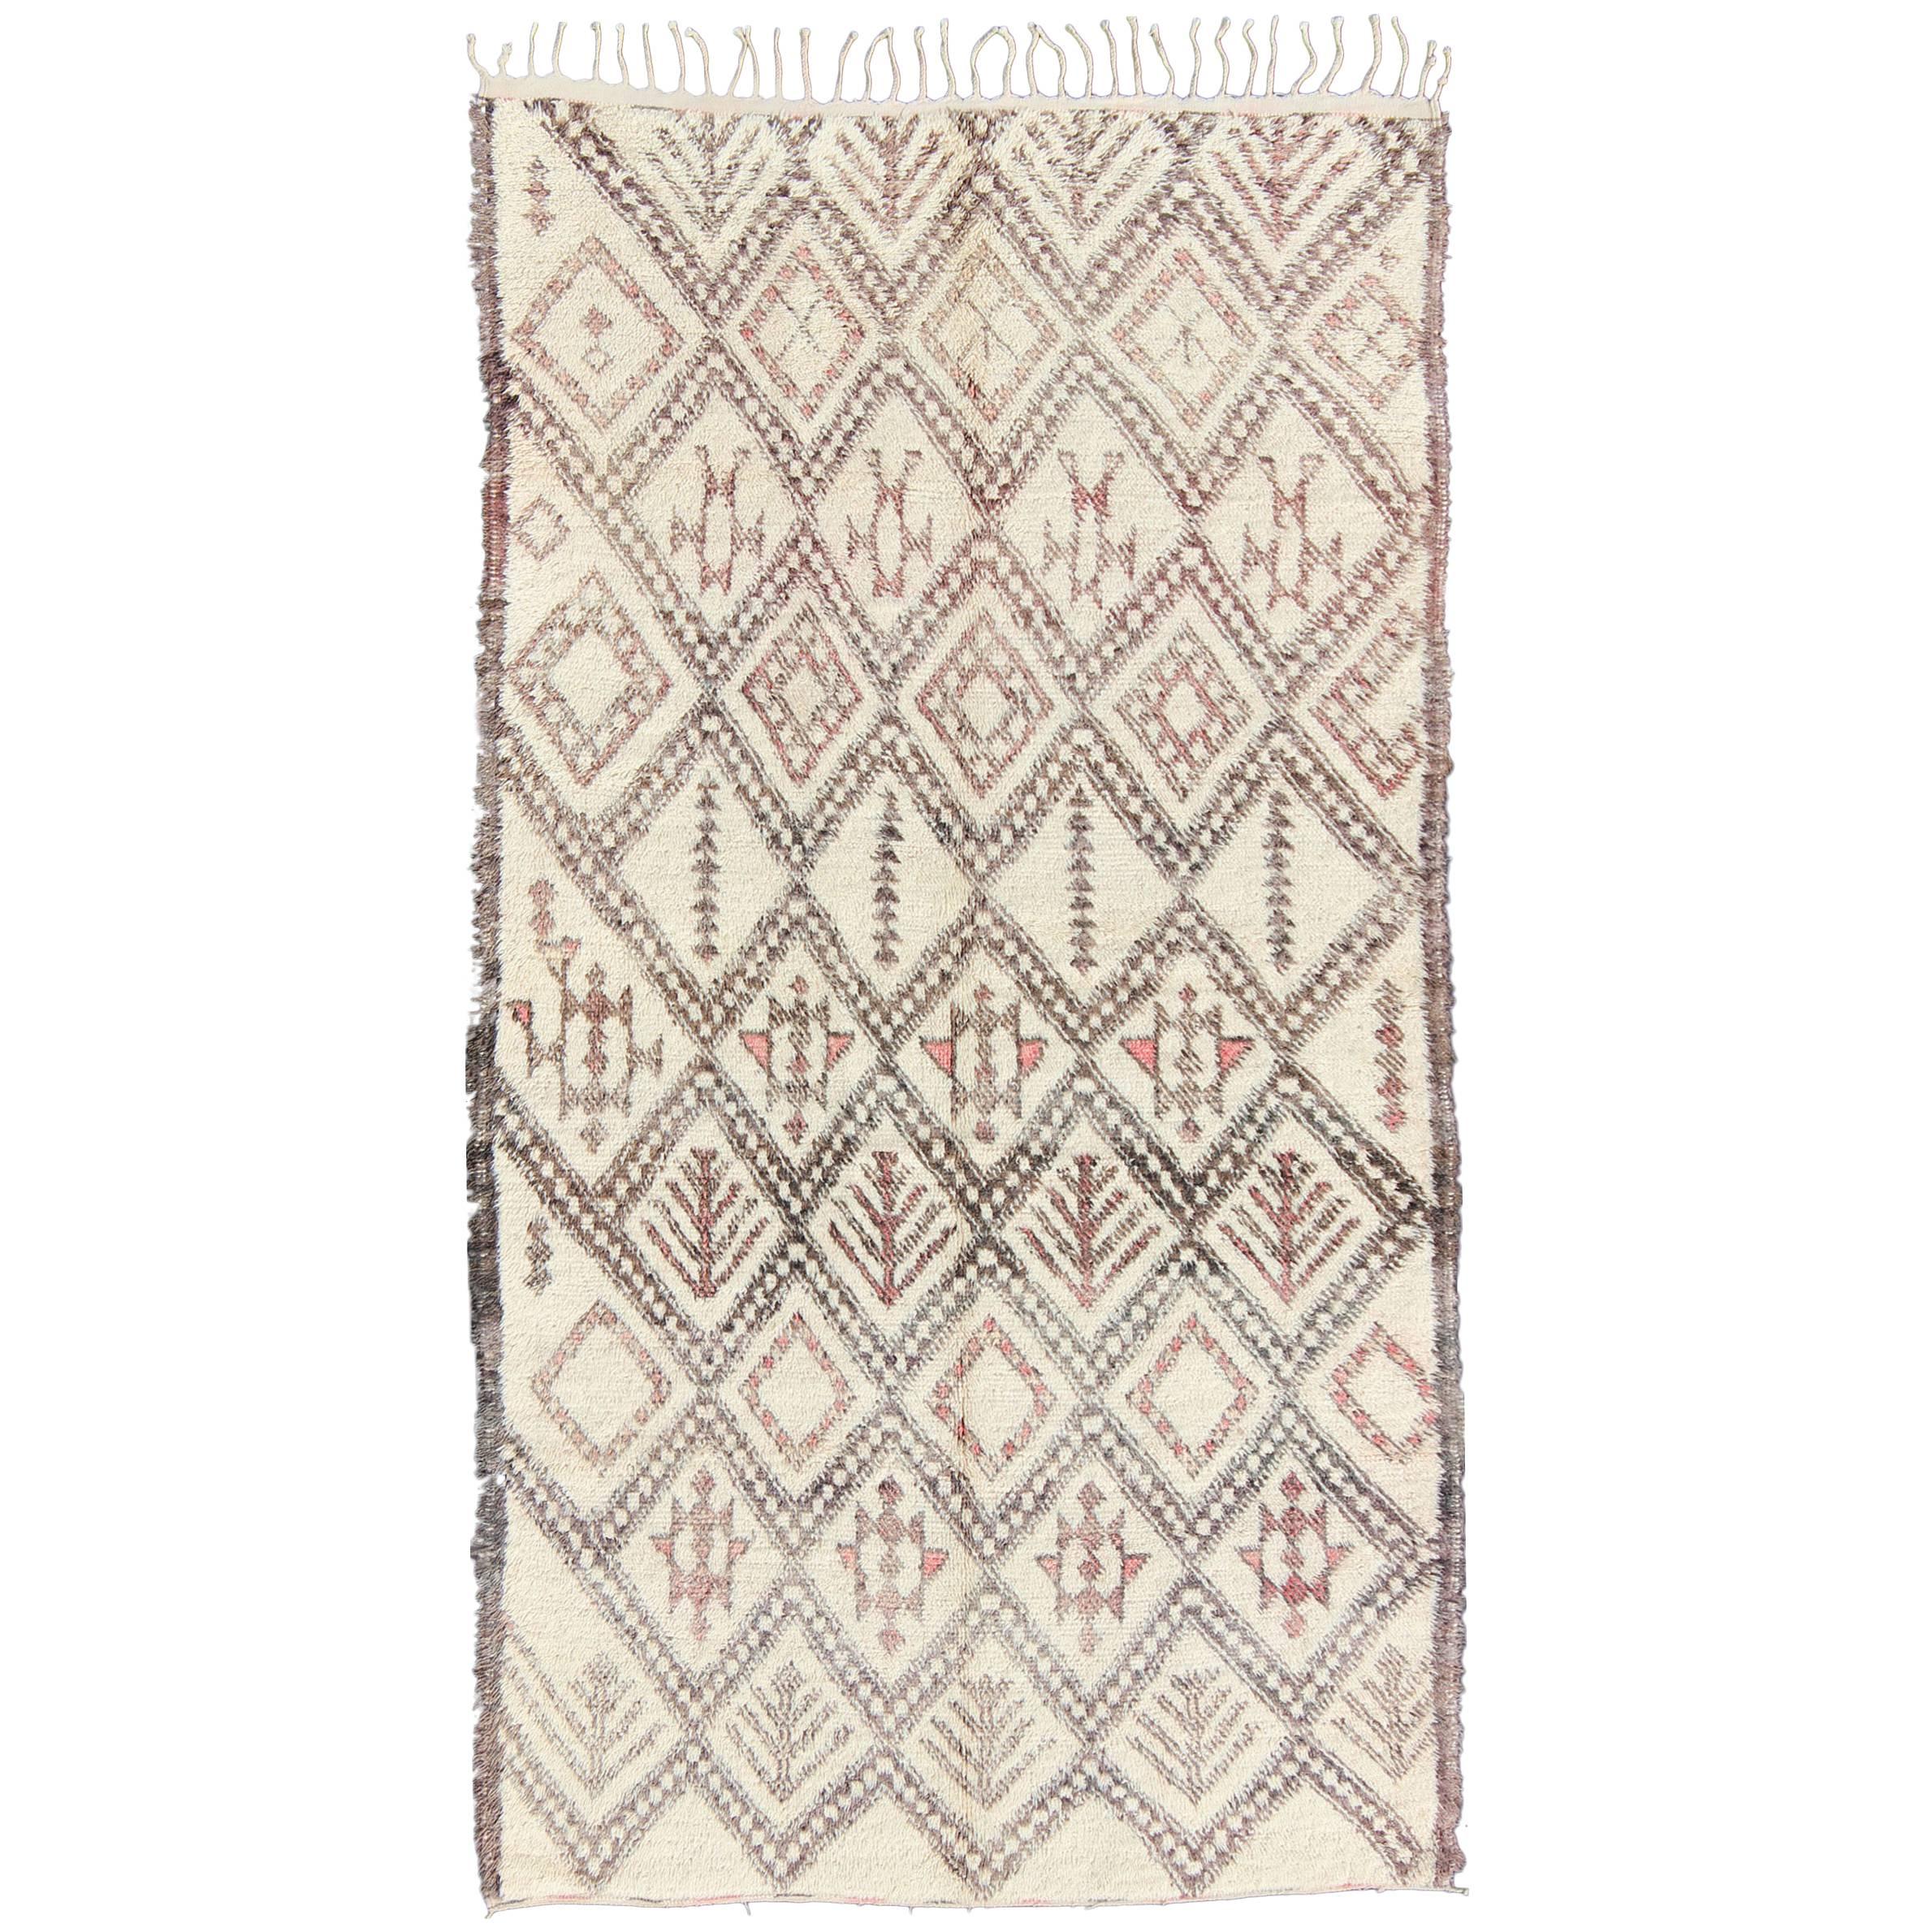 Large Moroccan Beni Ouarain Rug with Diamond Design in Light Ivory, Gray & Pink For Sale